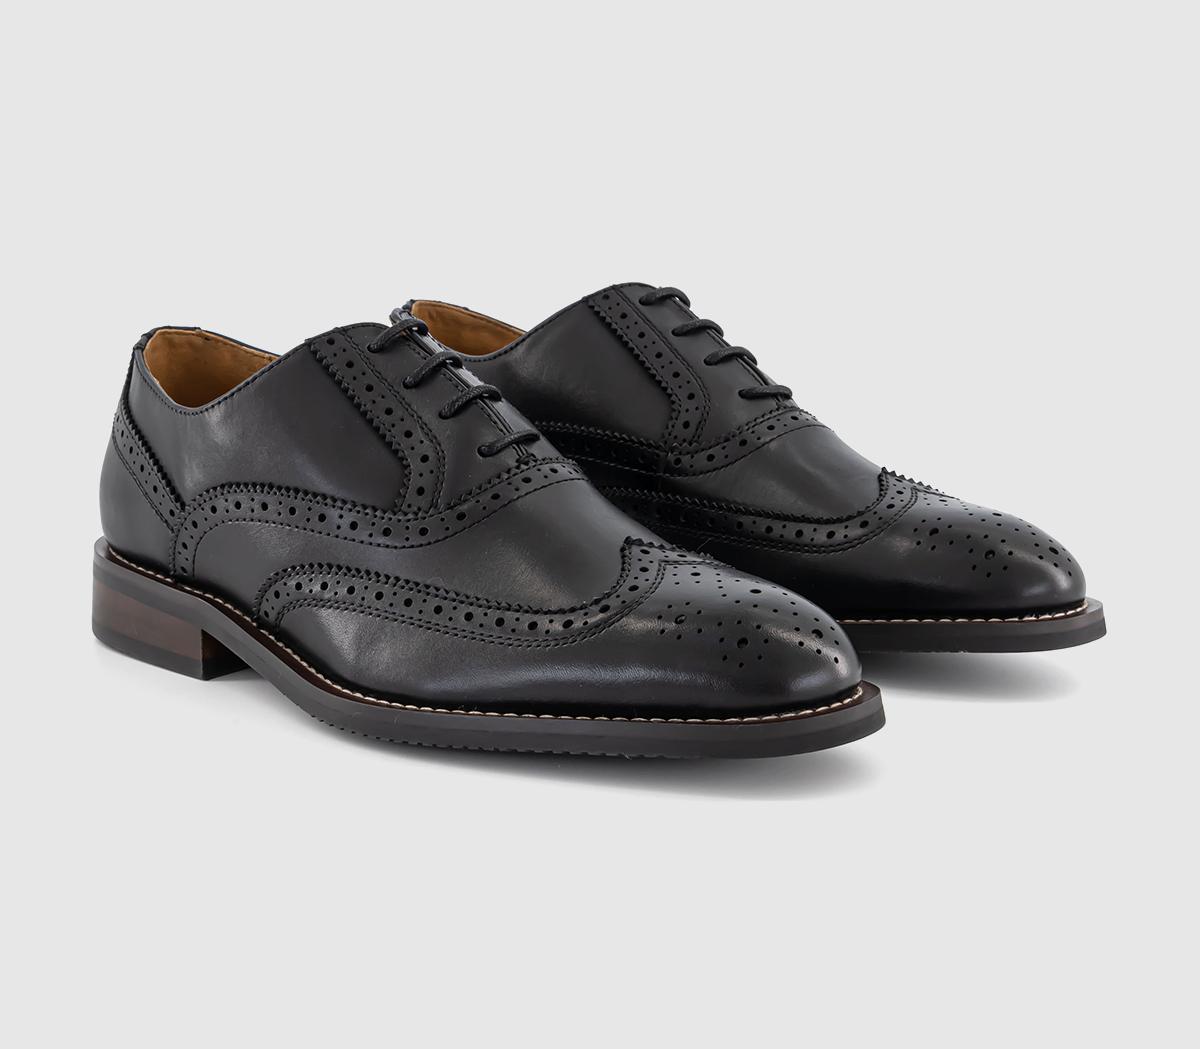 OFFICE Mens Mariner Wingcap Brogue Shoes Black Leather, 7